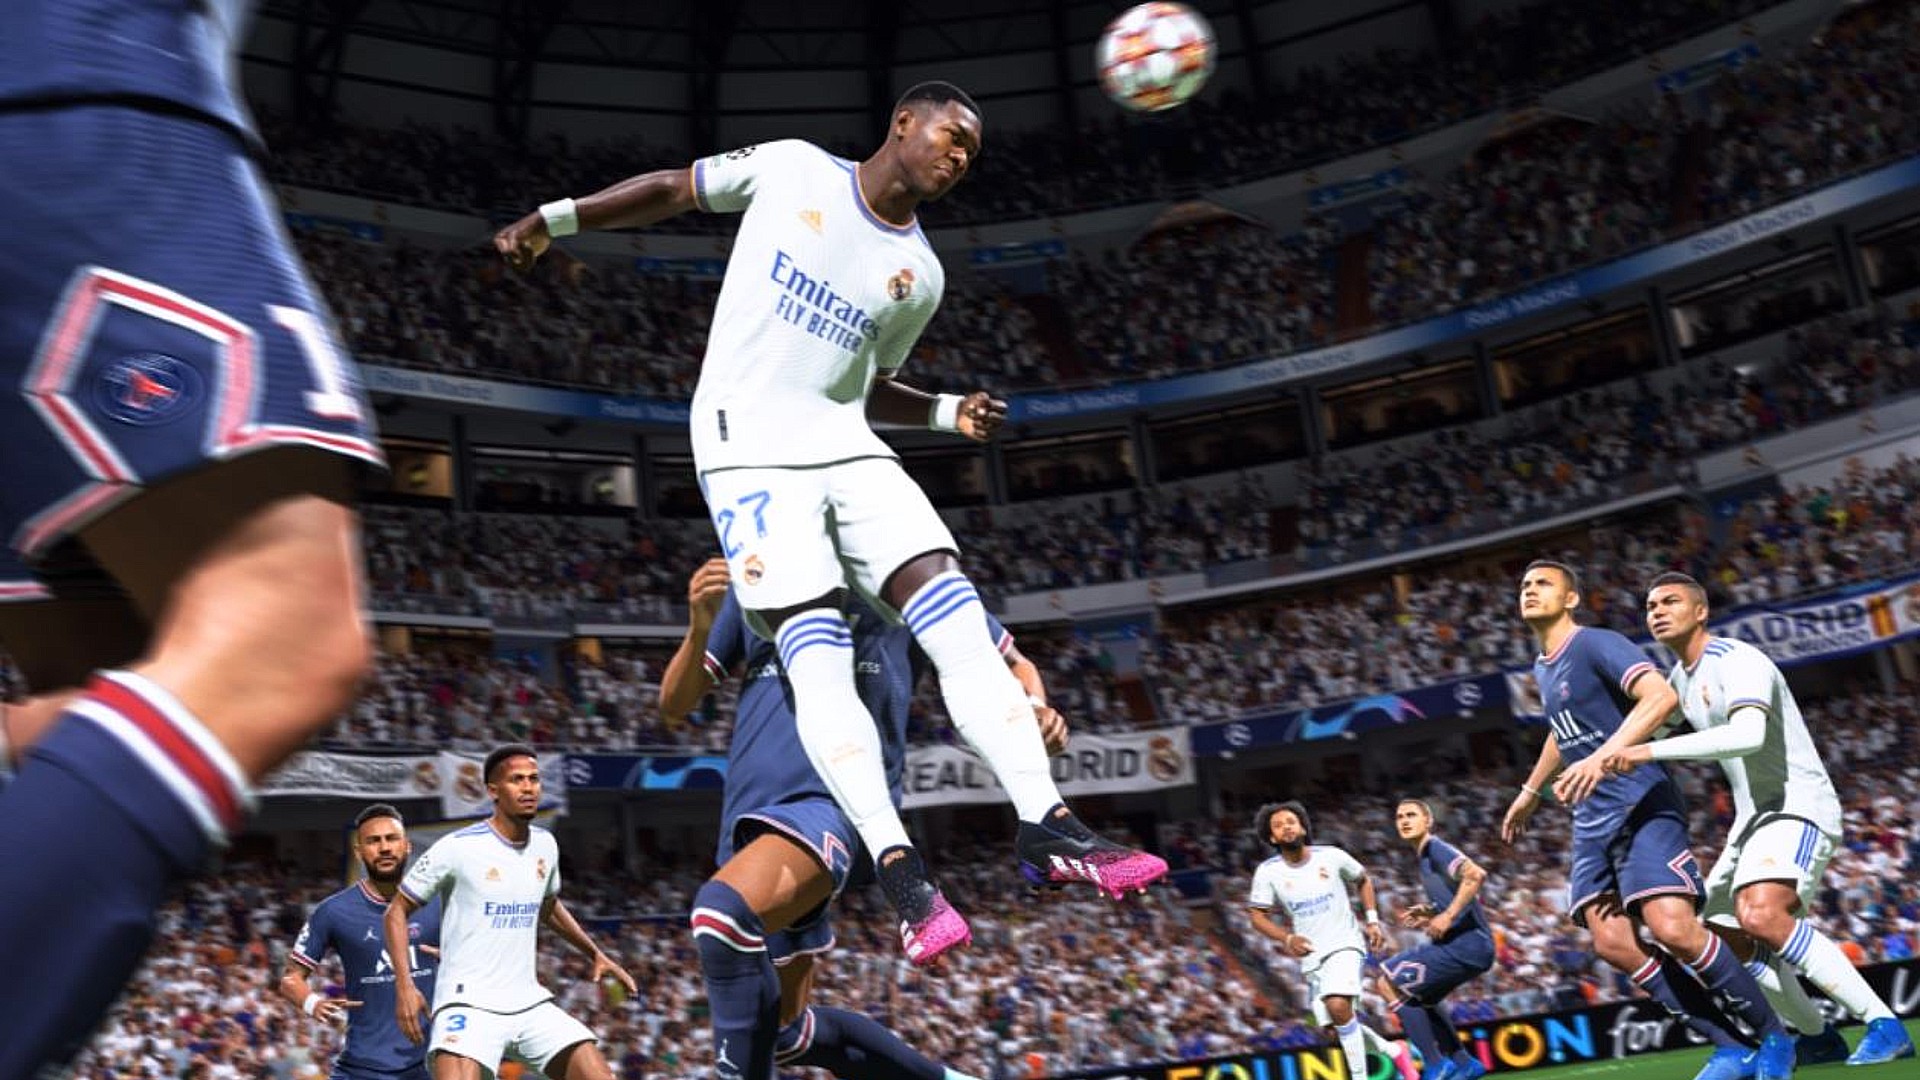 FIFA 22 HyperMotion: A player in white leaping into the air to header the ball.